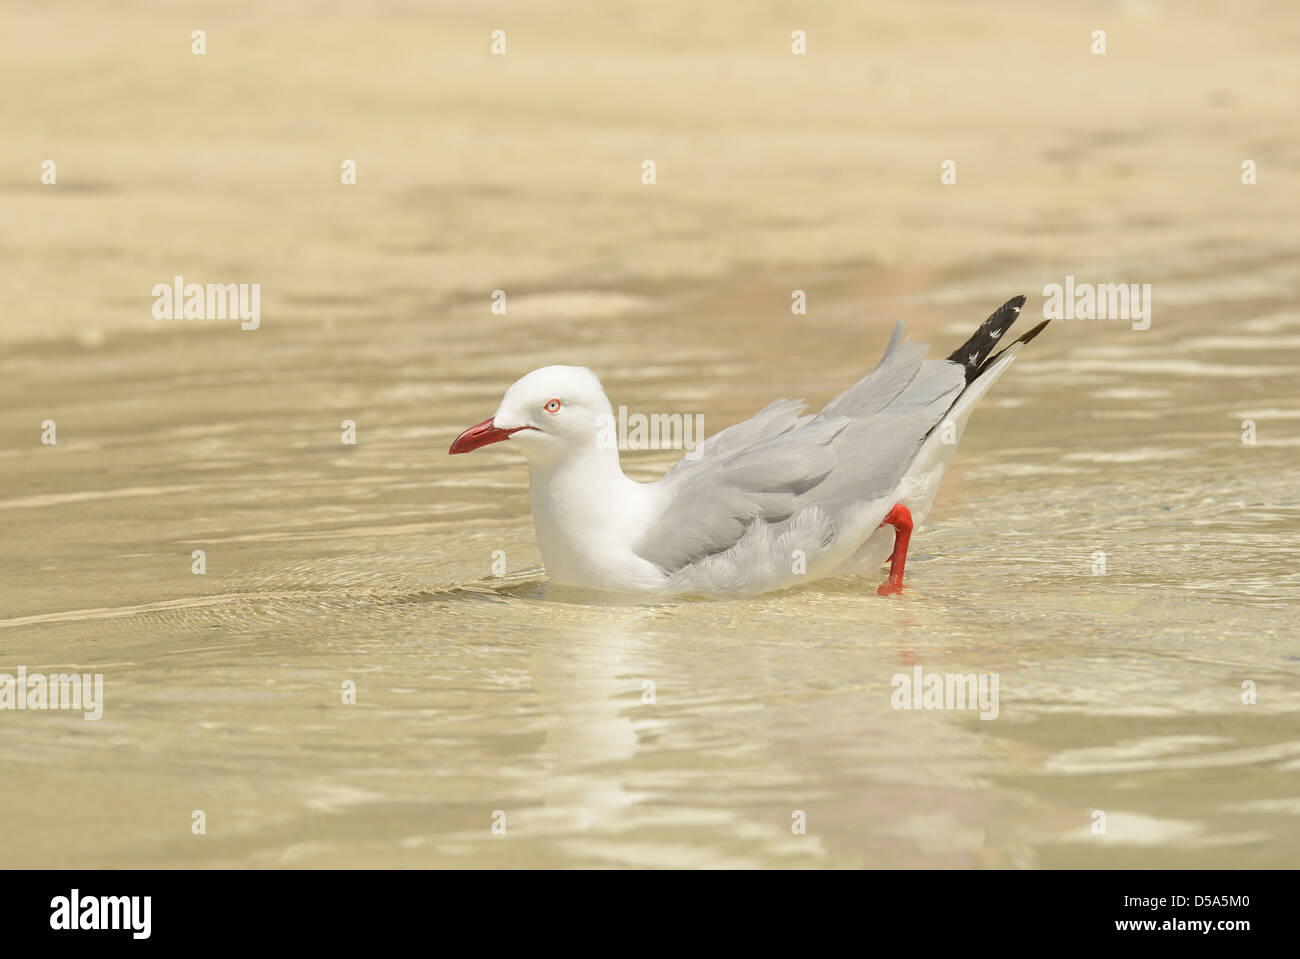 Silver Gull (Larus novaehollandiae) adult standing in sea water, about to bathe, Queensland, Australia, November Stock Photo